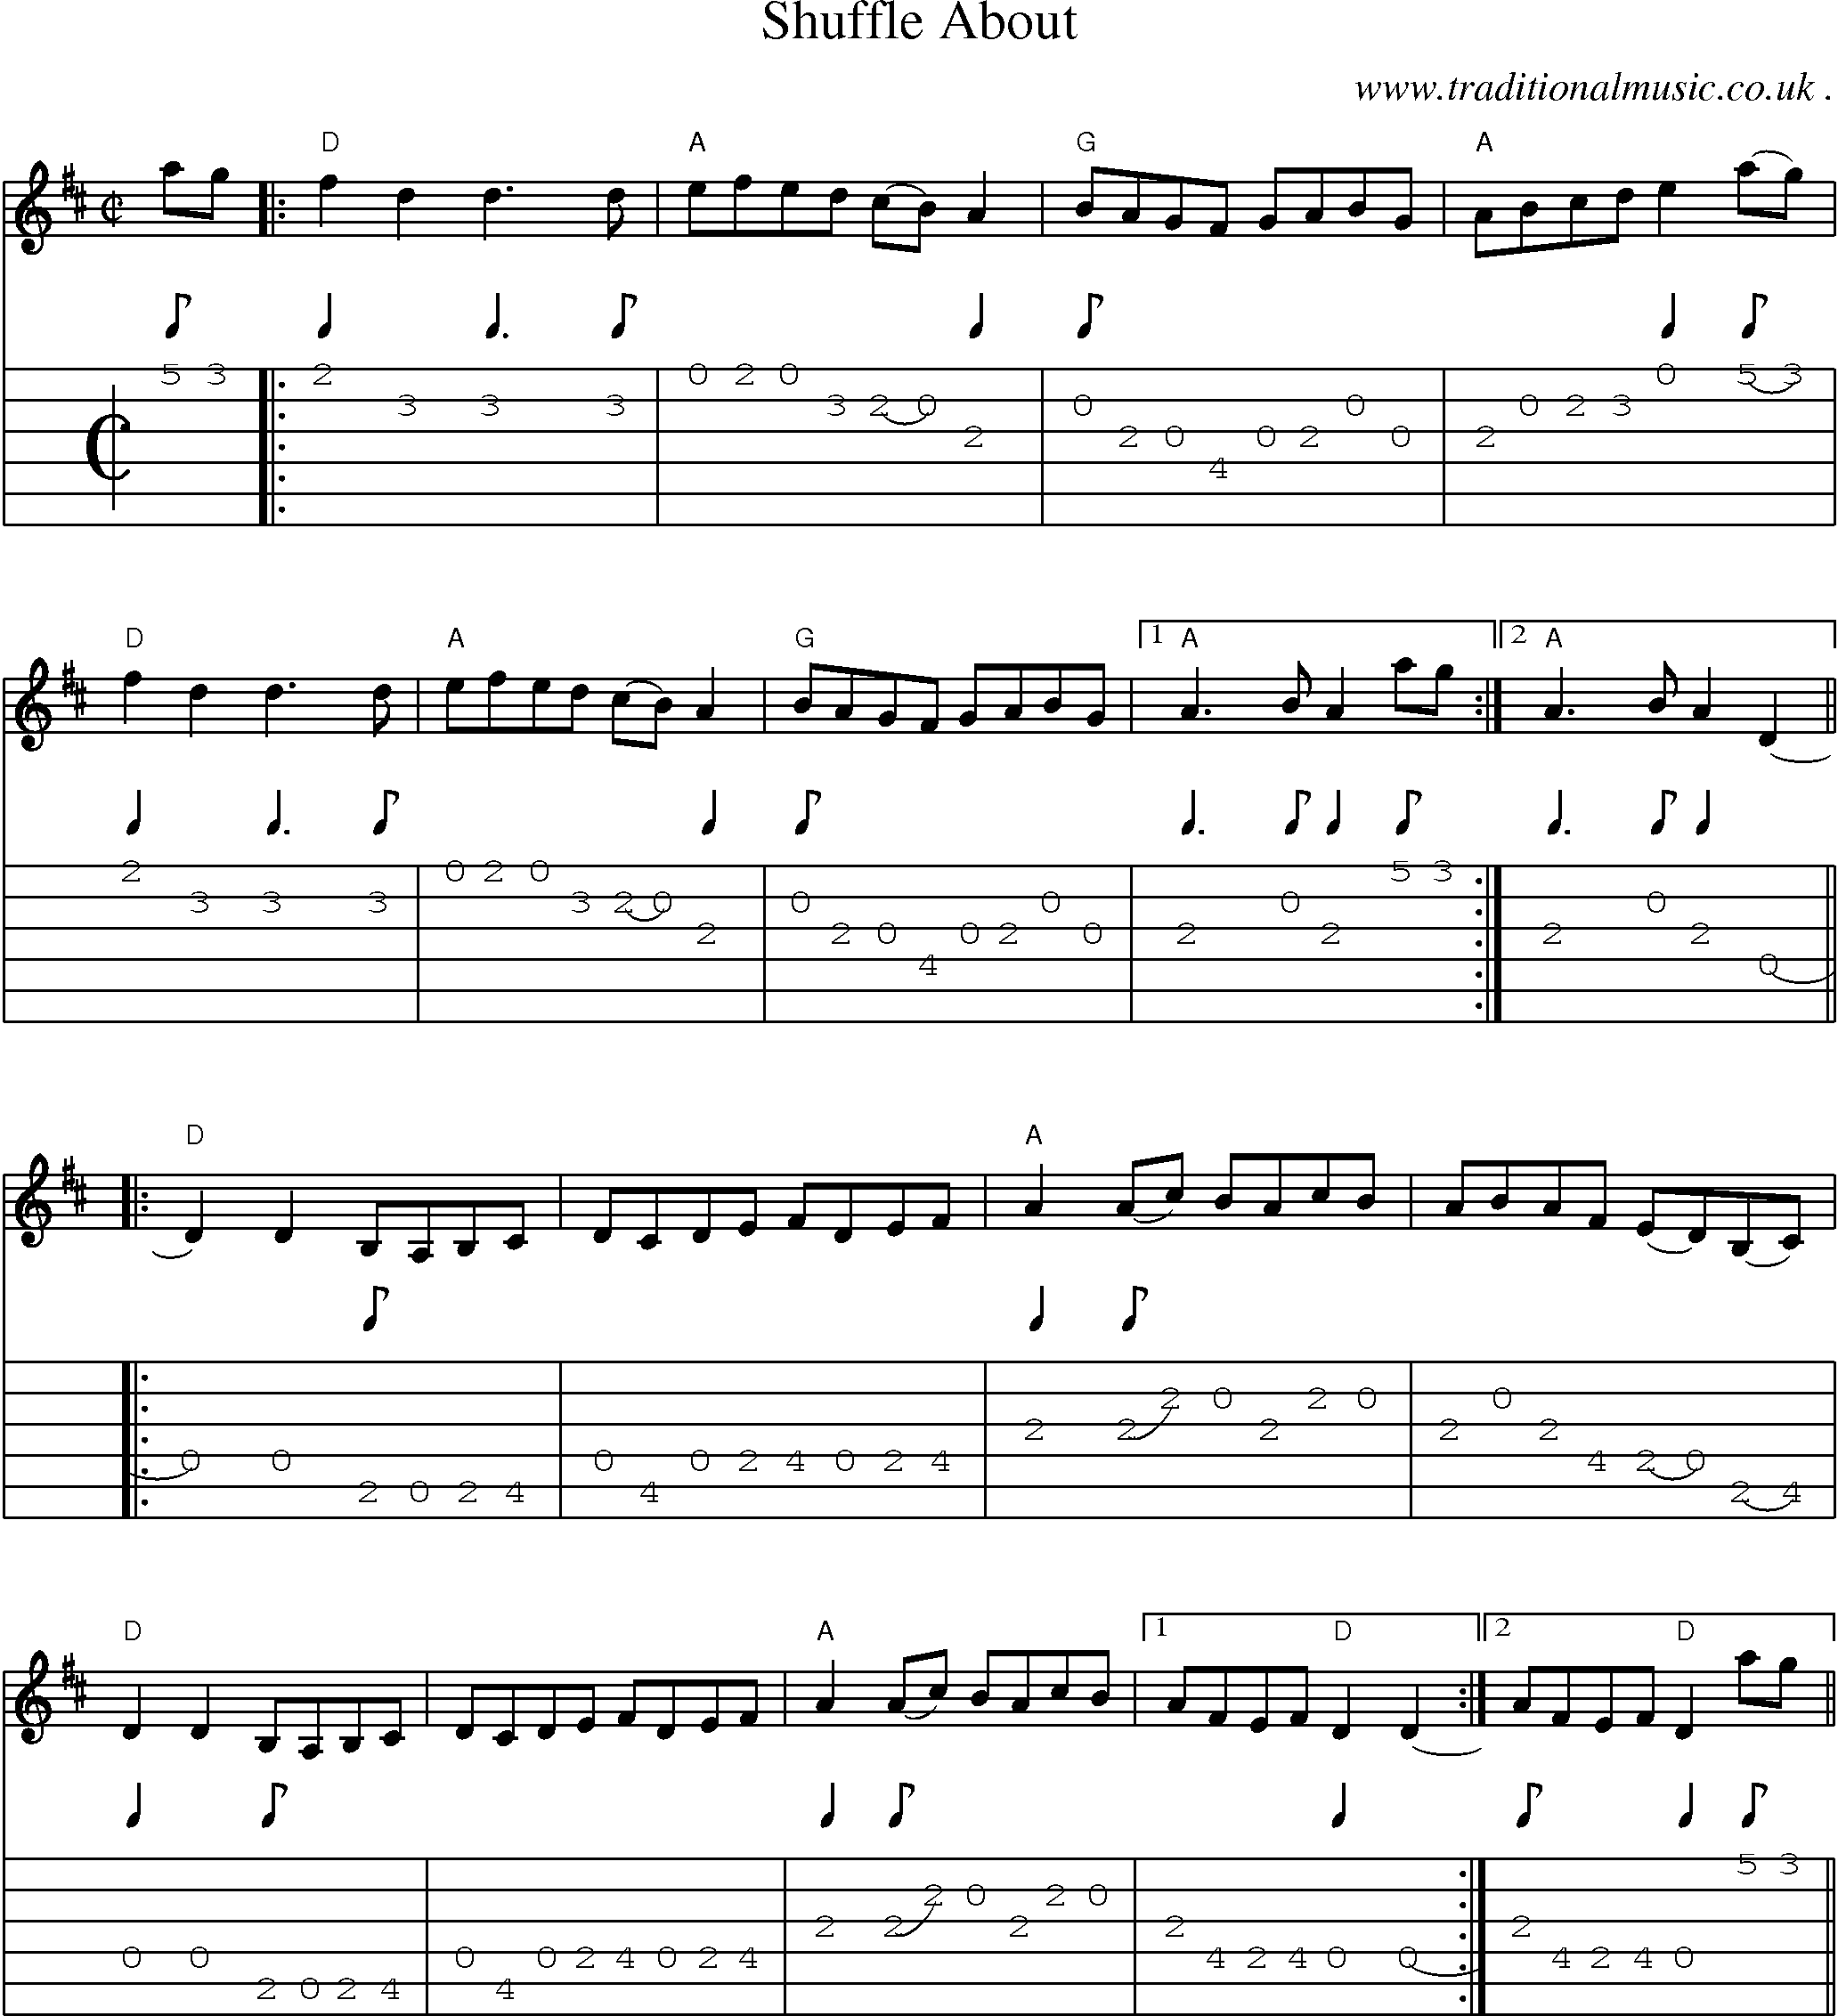 Music Score and Guitar Tabs for Shuffle About